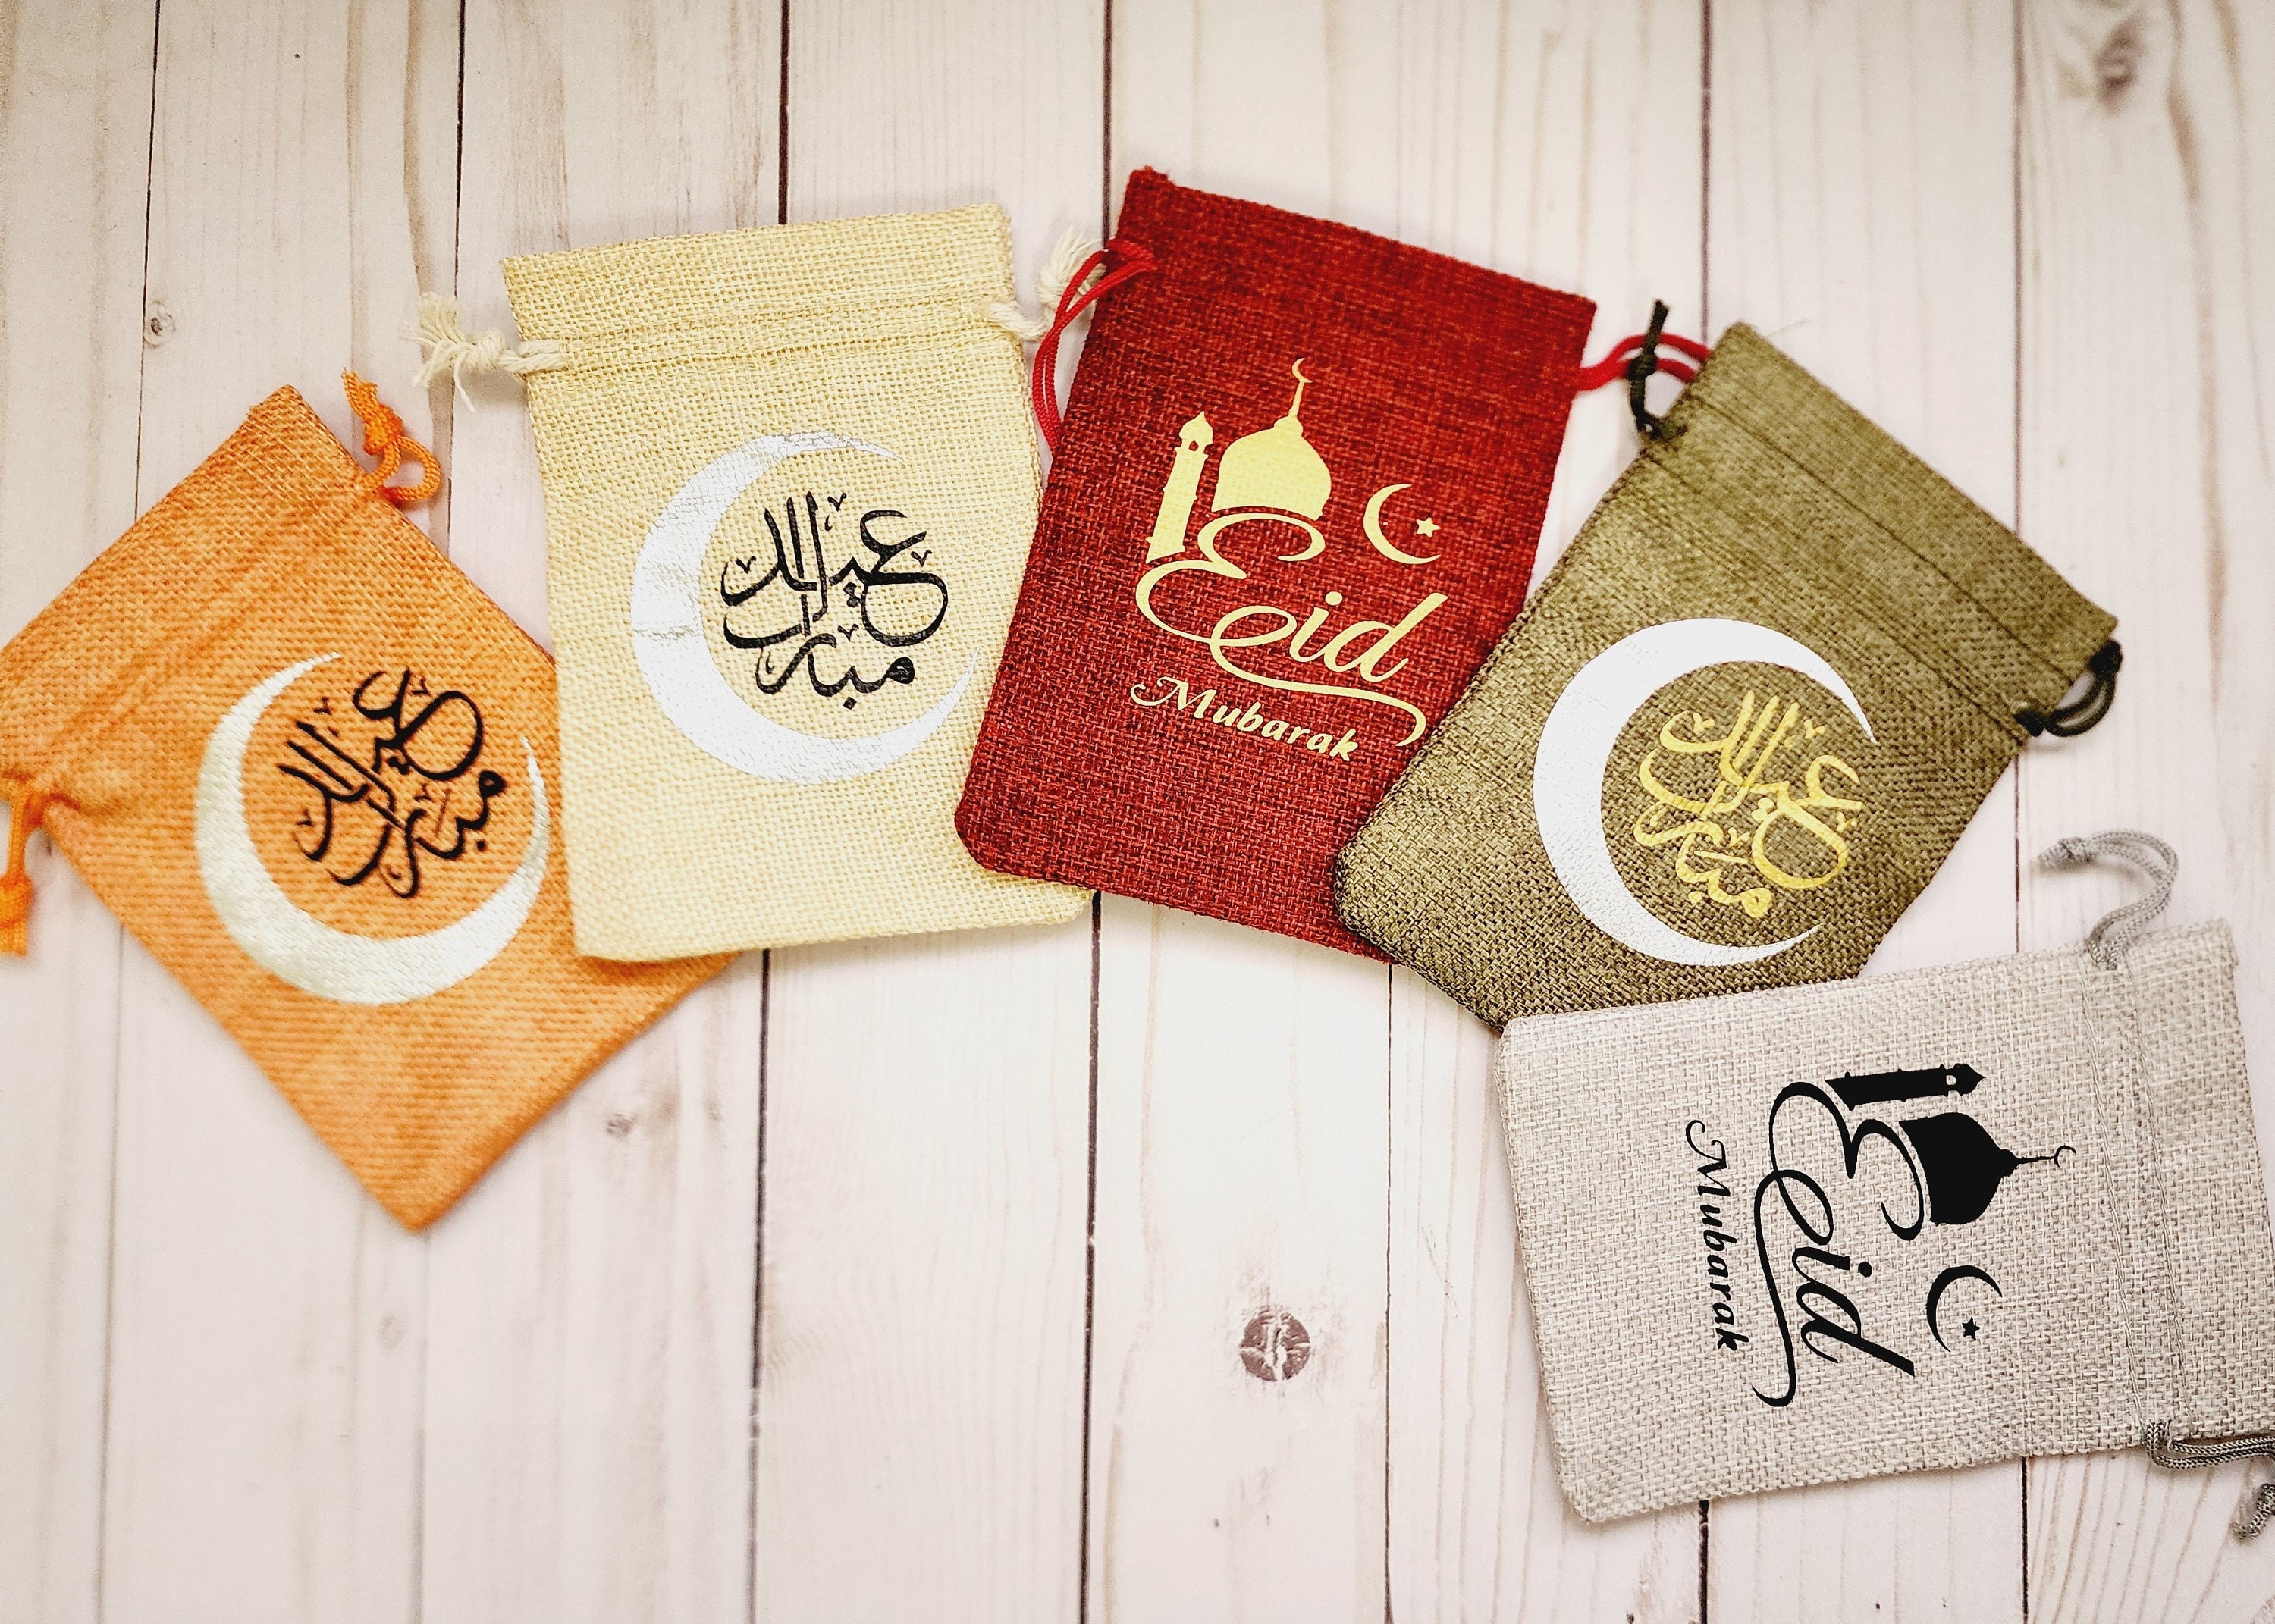 Arabic Eid Greeting Gold foil Stickers Set of 12 - Eidway Store